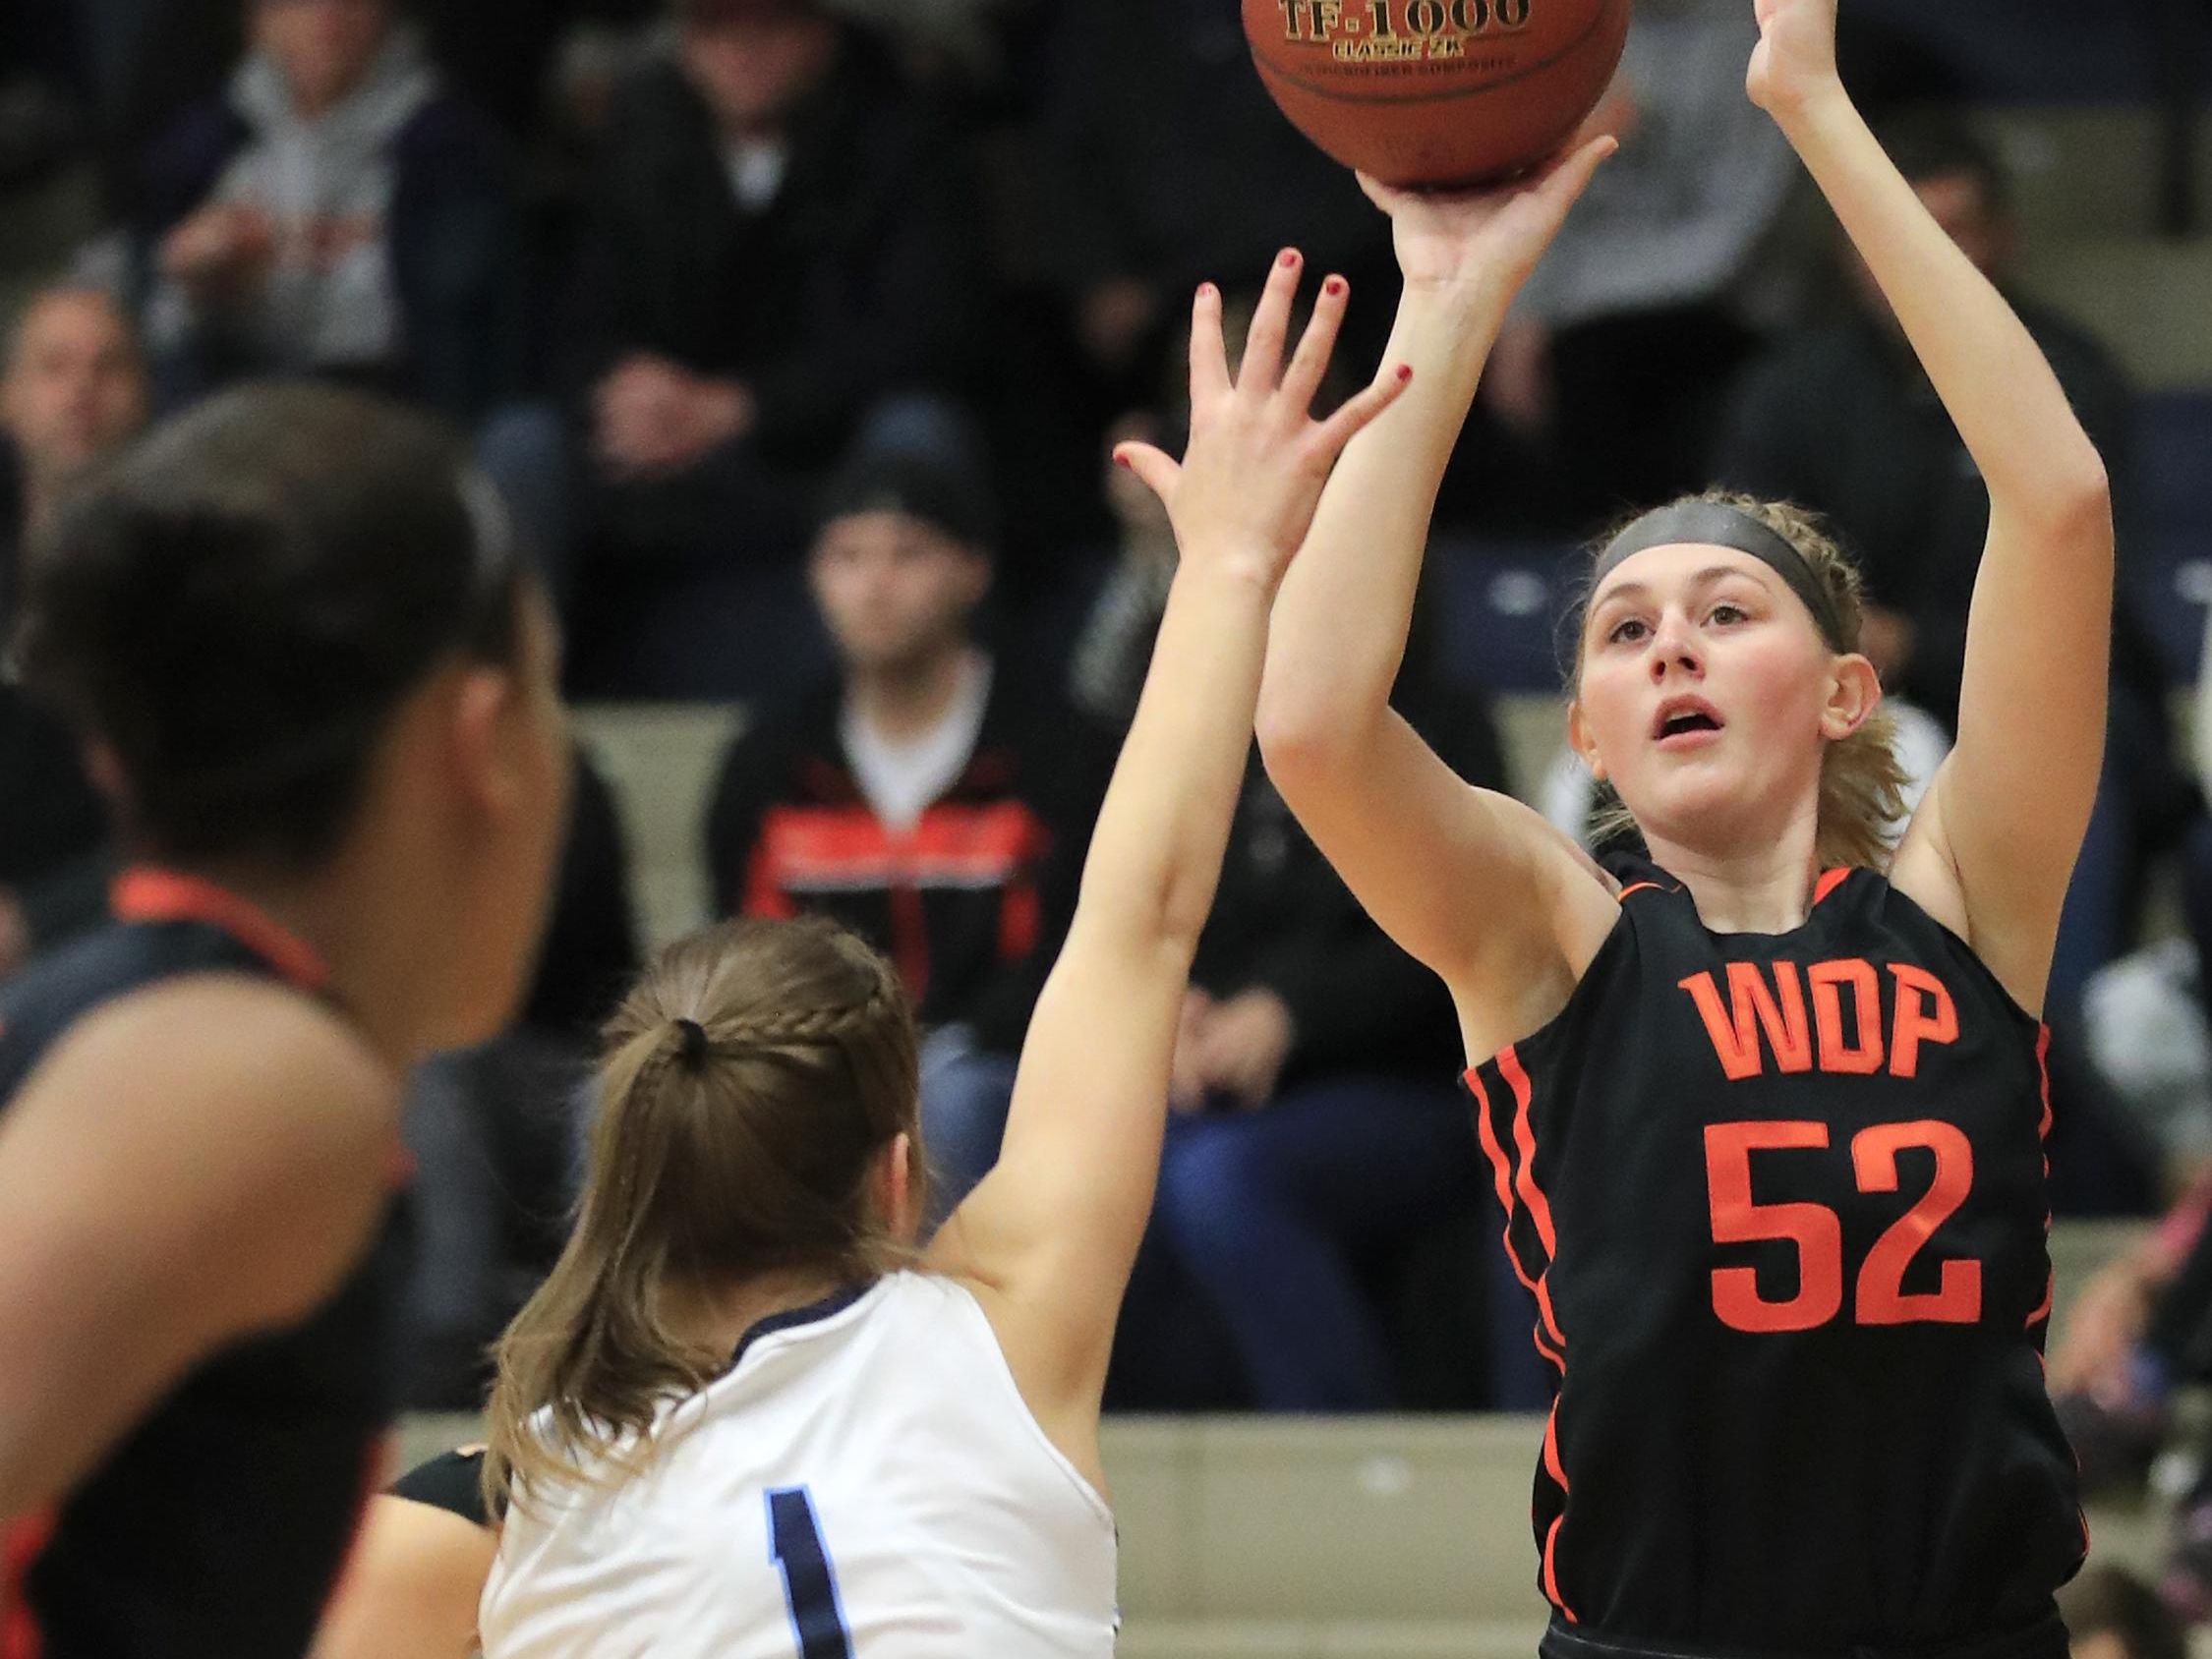 West De Pere's Hannah Stefaniak (52) shoots over Bay Port's Maddie Re (1) at Bay Port High School on Friday during a nonconference girls basketball game. The Phantoms won 46-39 in a matchup between conference leaders.